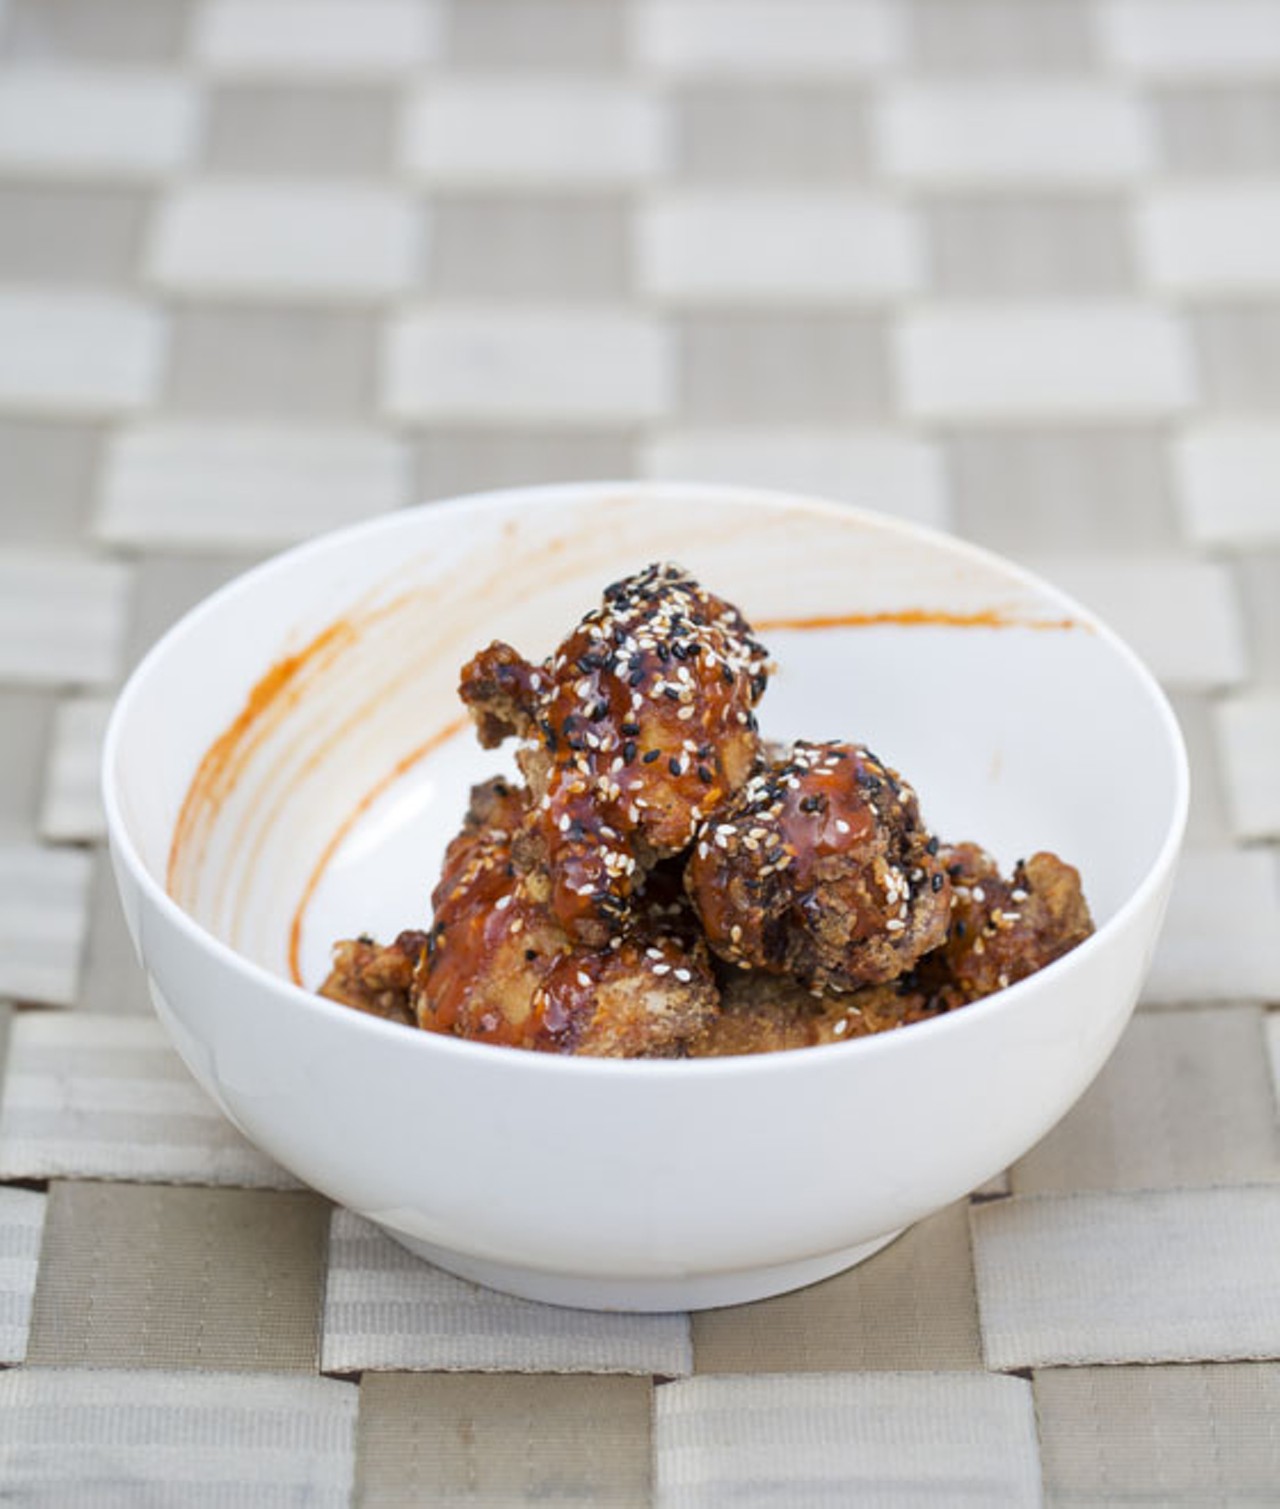 Korean Fried Chicken "KFC" is Korean-style fried chicken wings, sweet soy reduction and Siam sauce.